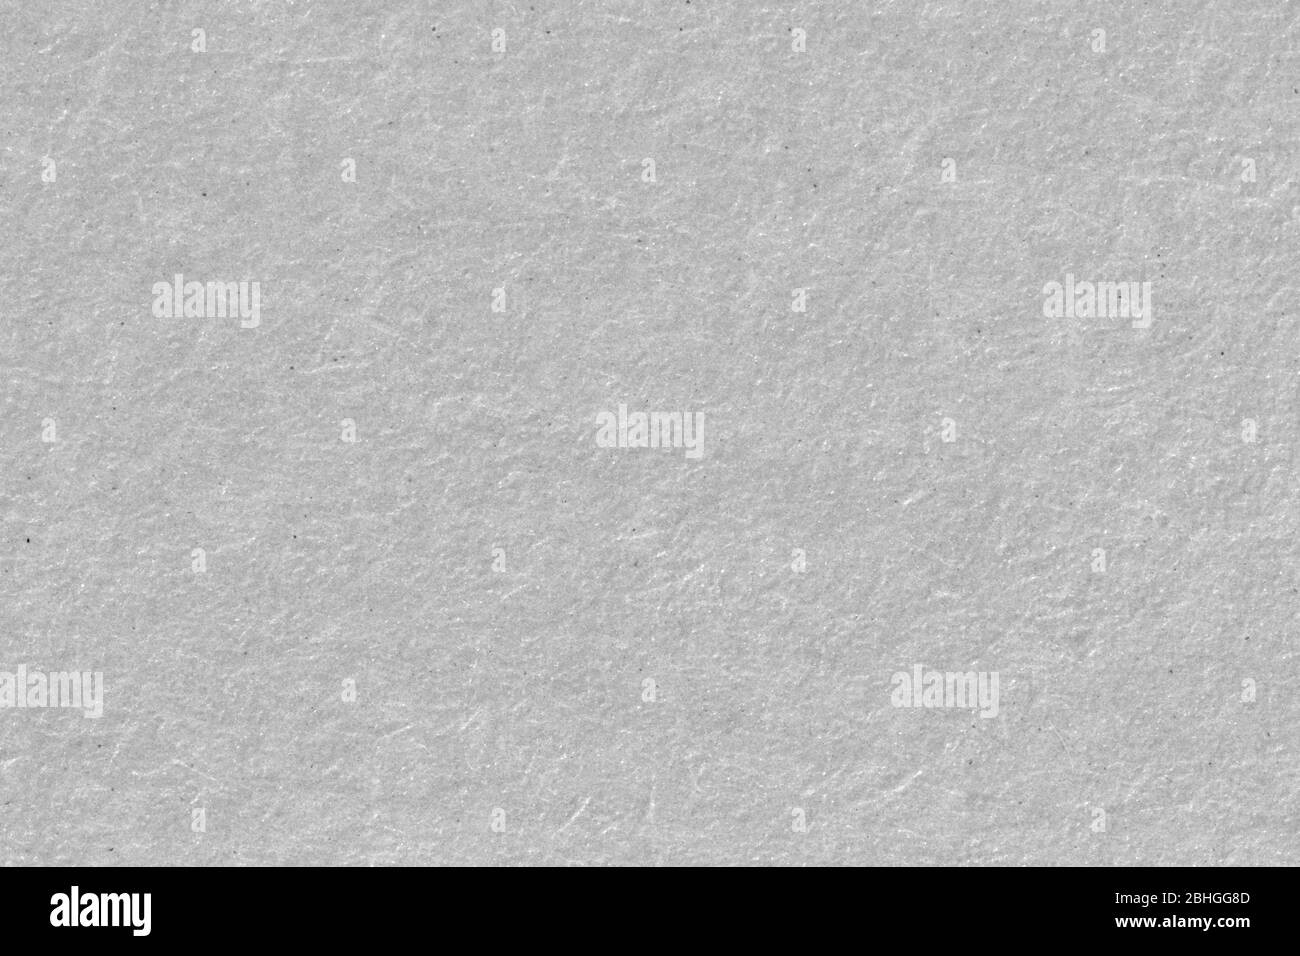 Grey paper texture. Paper in extremely high resolution. Stock Photo